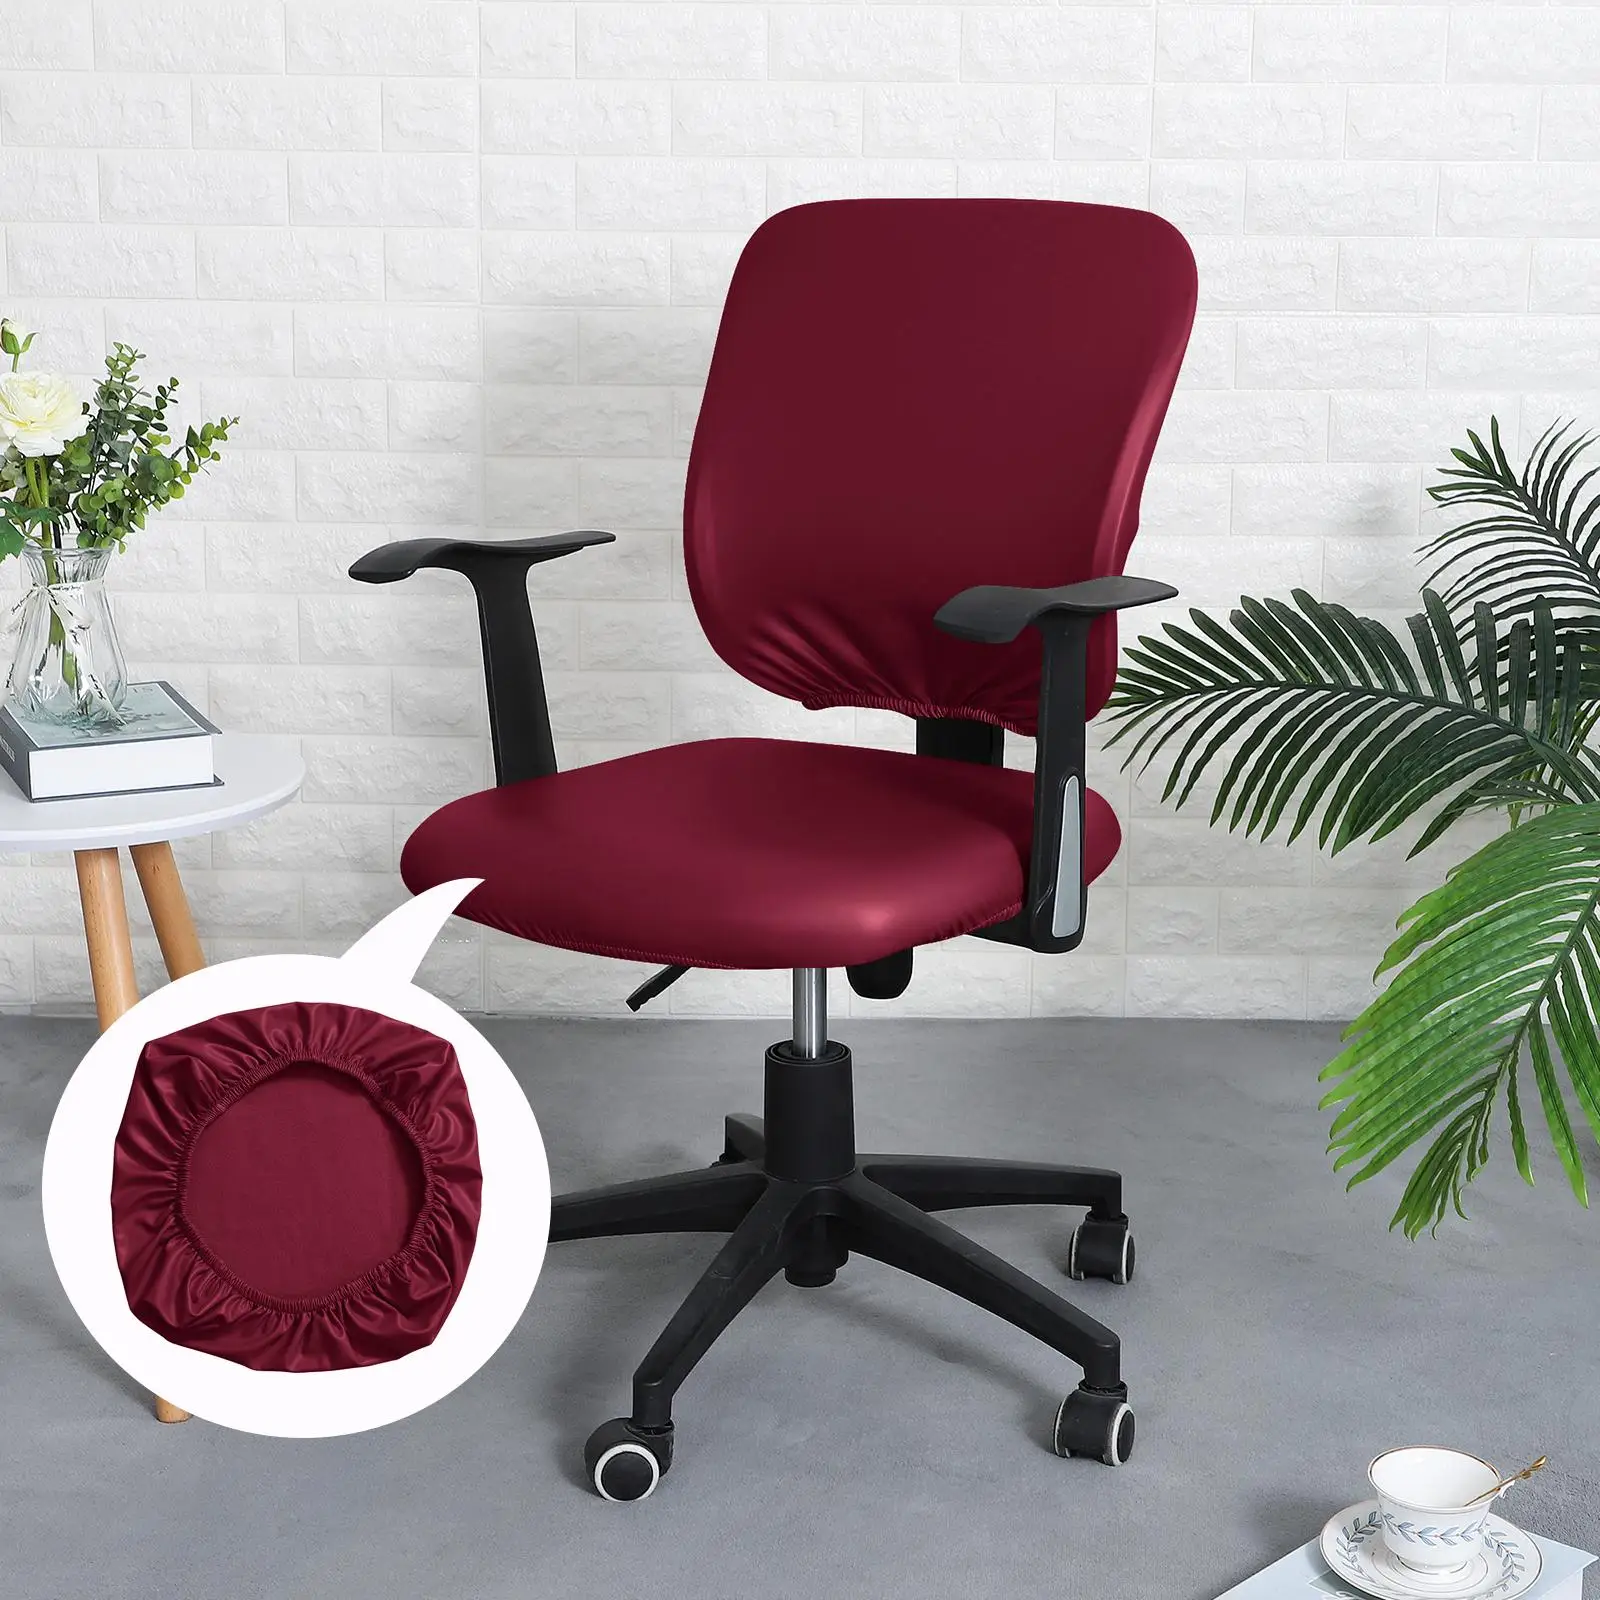 Modern Chair Seat Cover Slipcover Dustproof Removable Chair Seat Protectors Non Slip 15